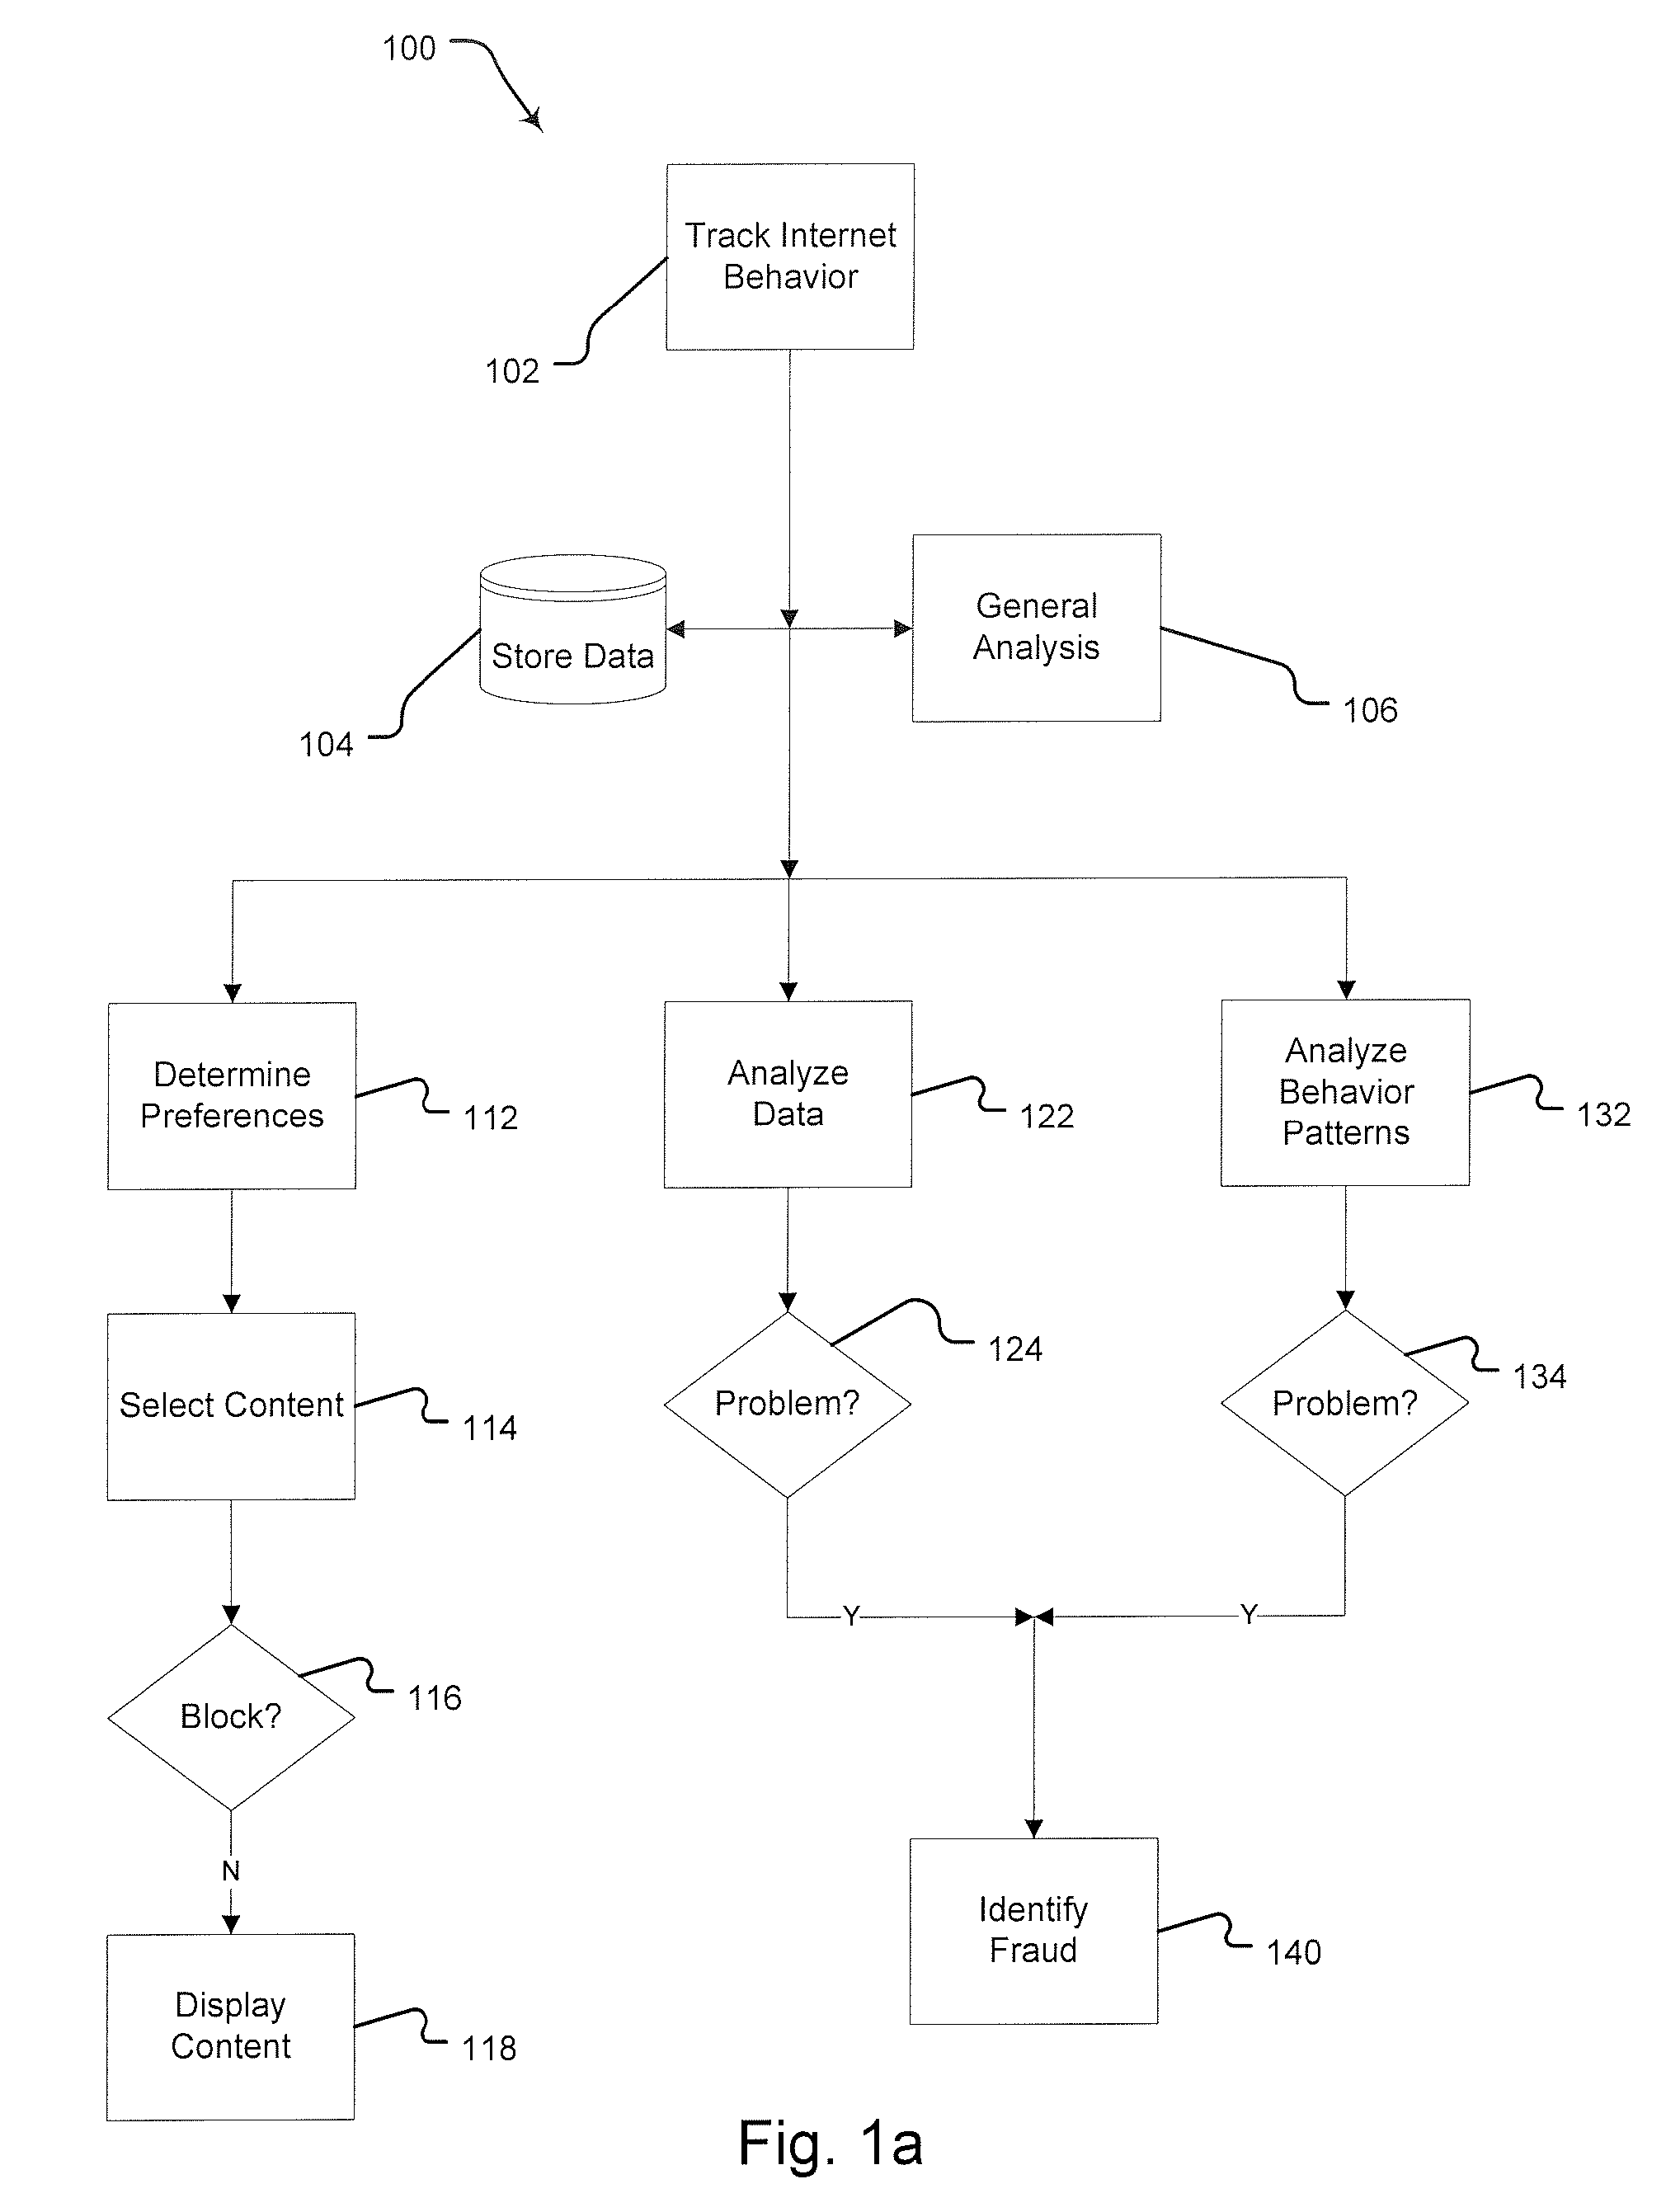 Method for Detecting and Preventing Fraudulent Internet Advertising Activity